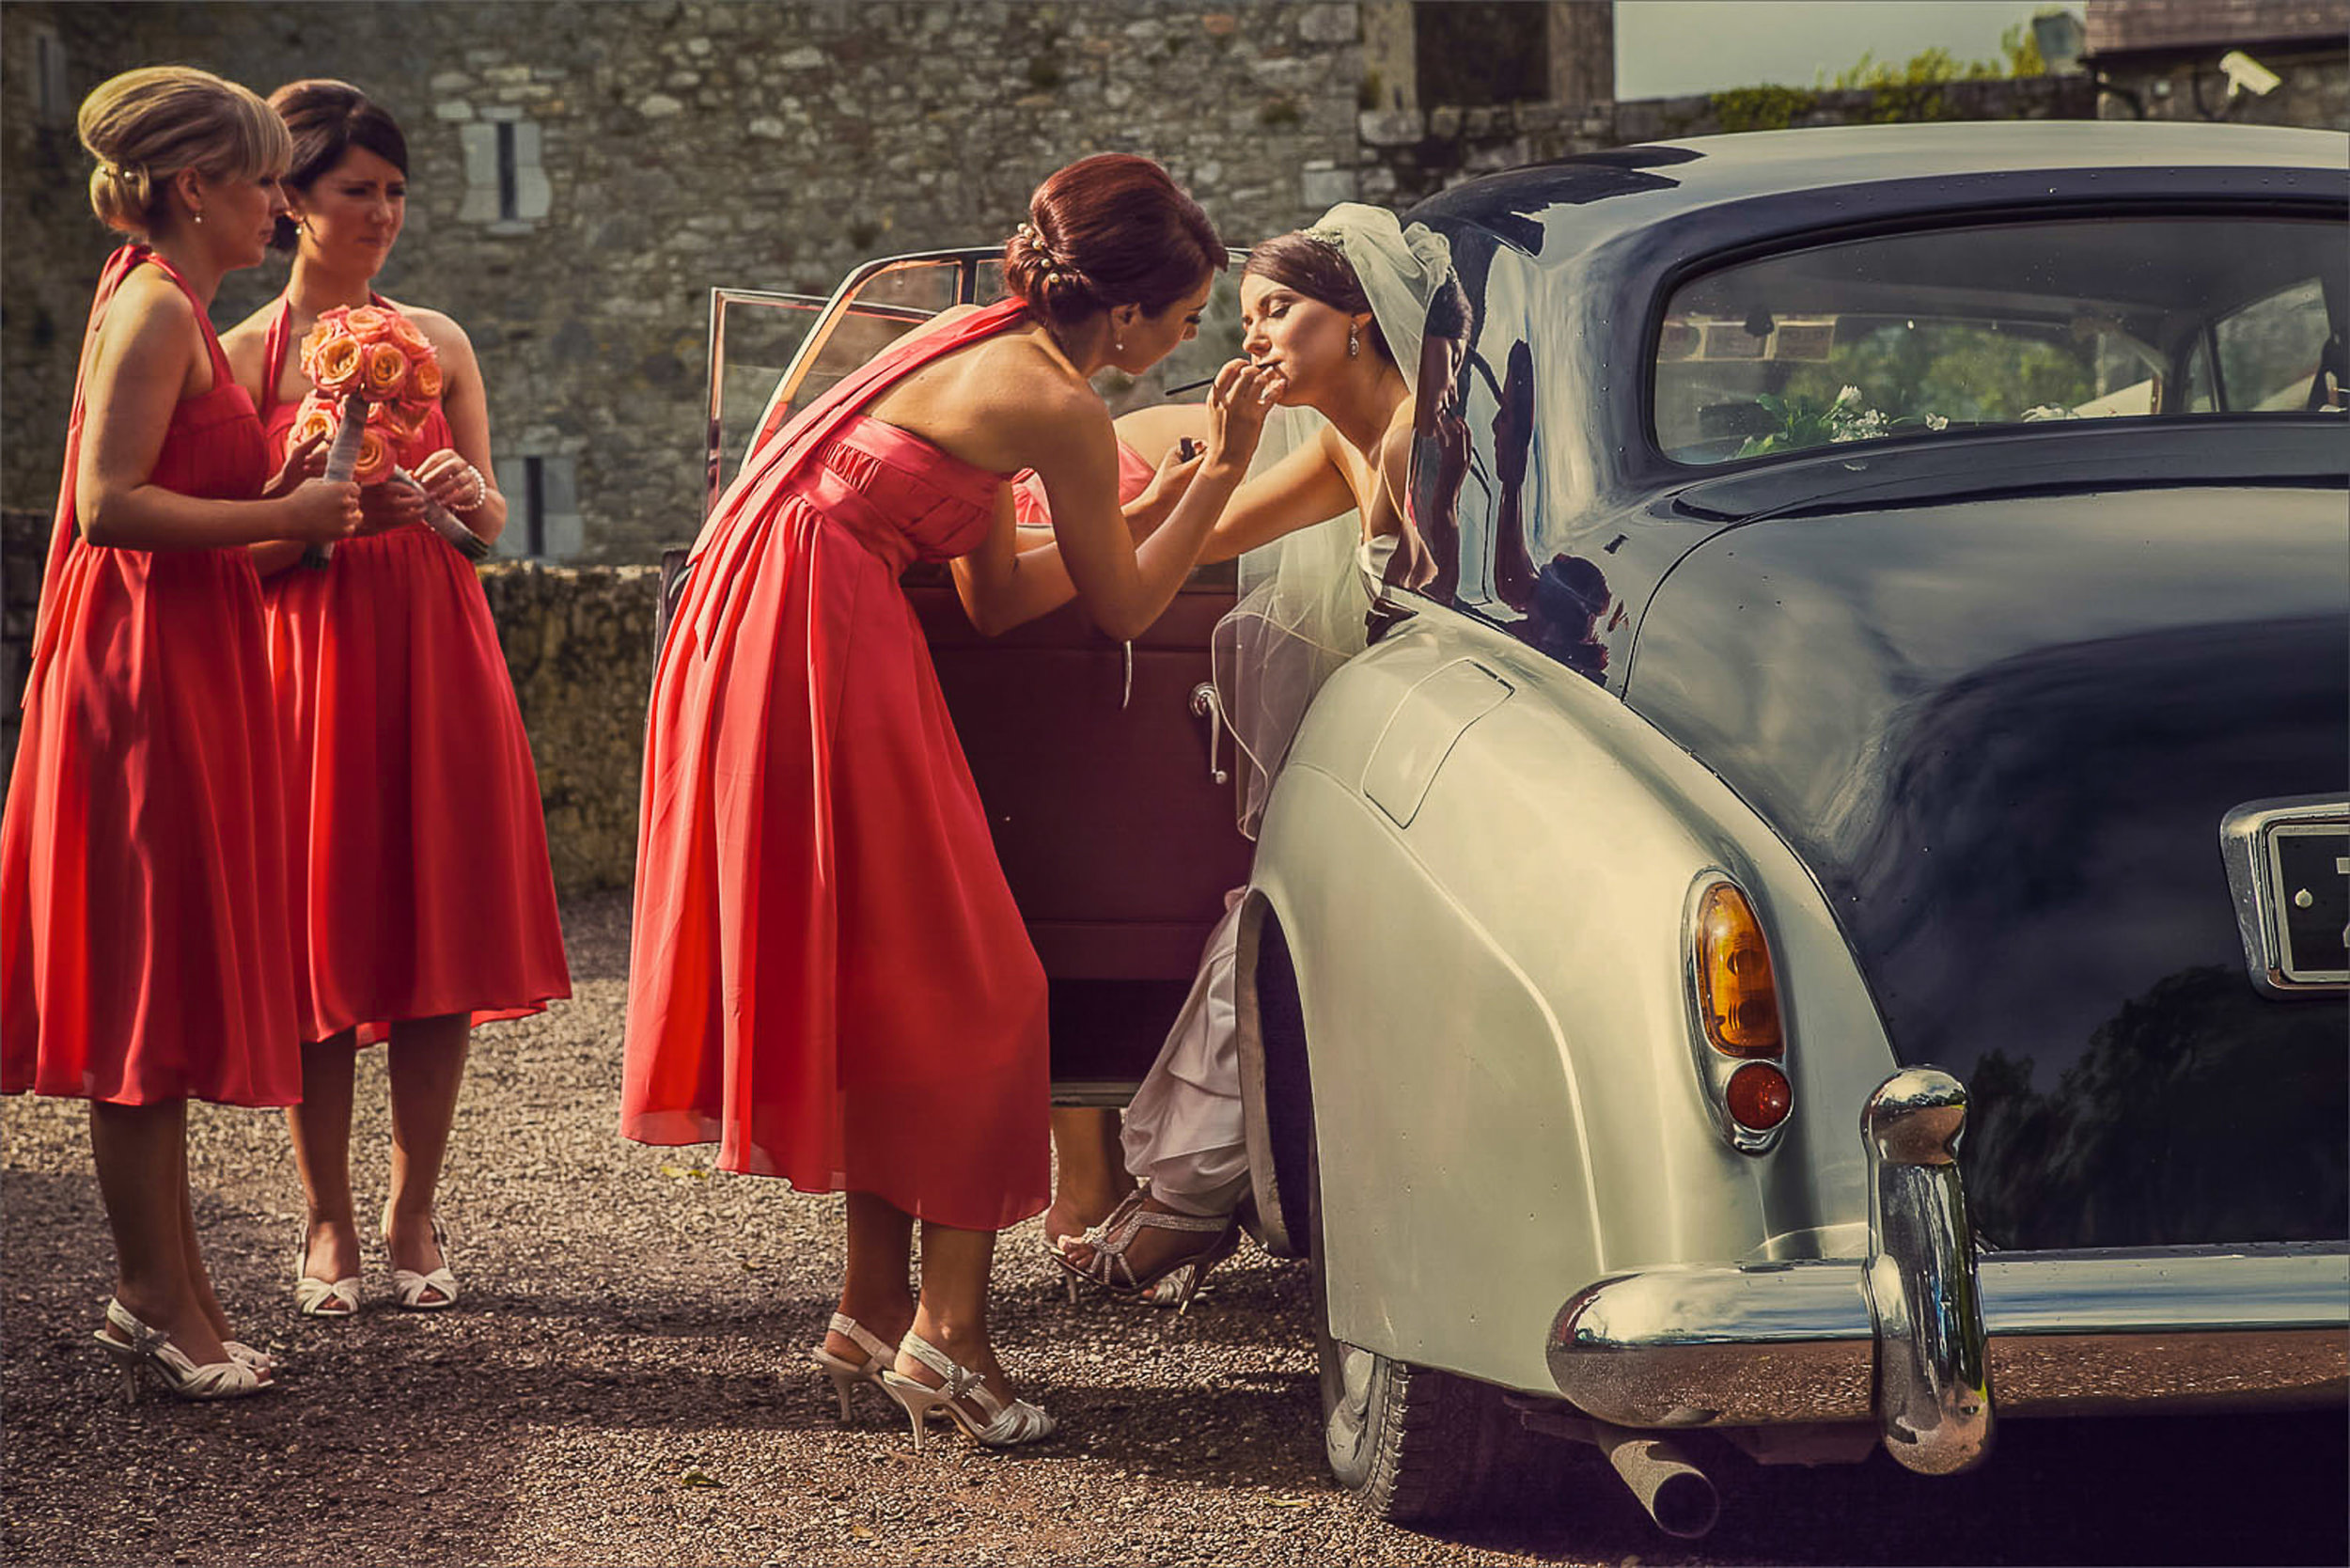 Vintage Wedding Car - Wedding photography in Cork Ireland by David Casey. Bride in white wedding dress with bridesmaids in colourful bridesmaids dresses